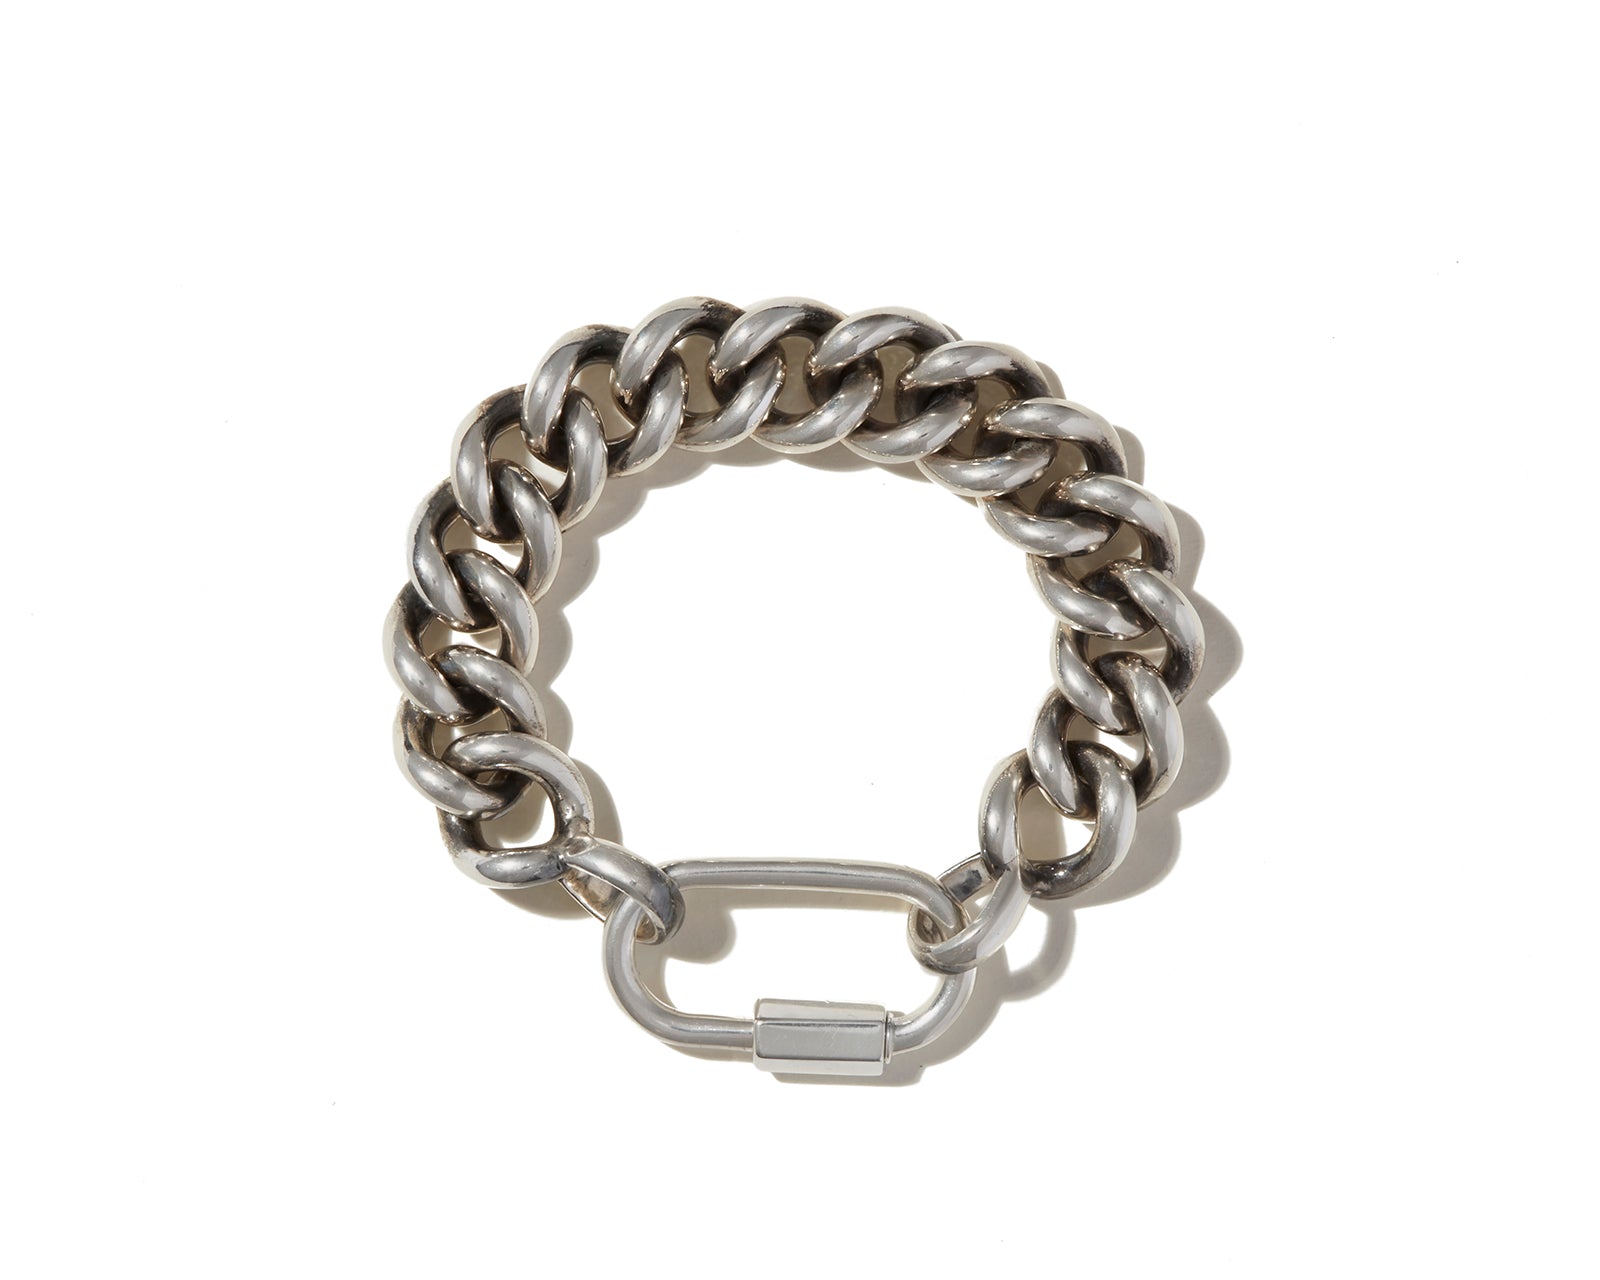 Chunky curb chain necklace with silver lock charm